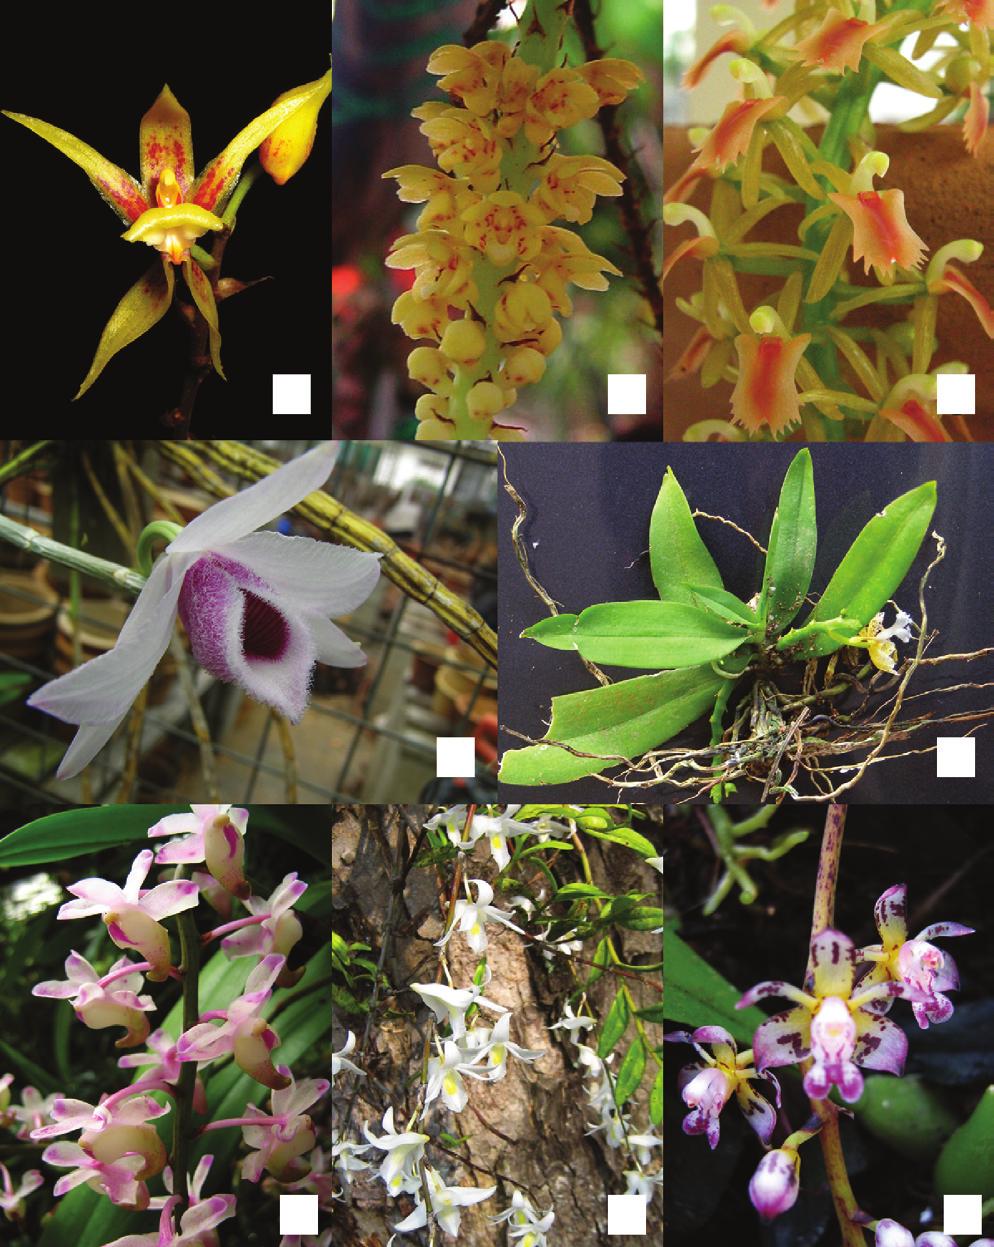 A Survey on Orchids in Selected Trails of Gunung Nuang Forest Reserve RESULTS AND DISCUSSION A total of 38 orchid species, belonging to 23 genera, were identified during this study (Table 1).